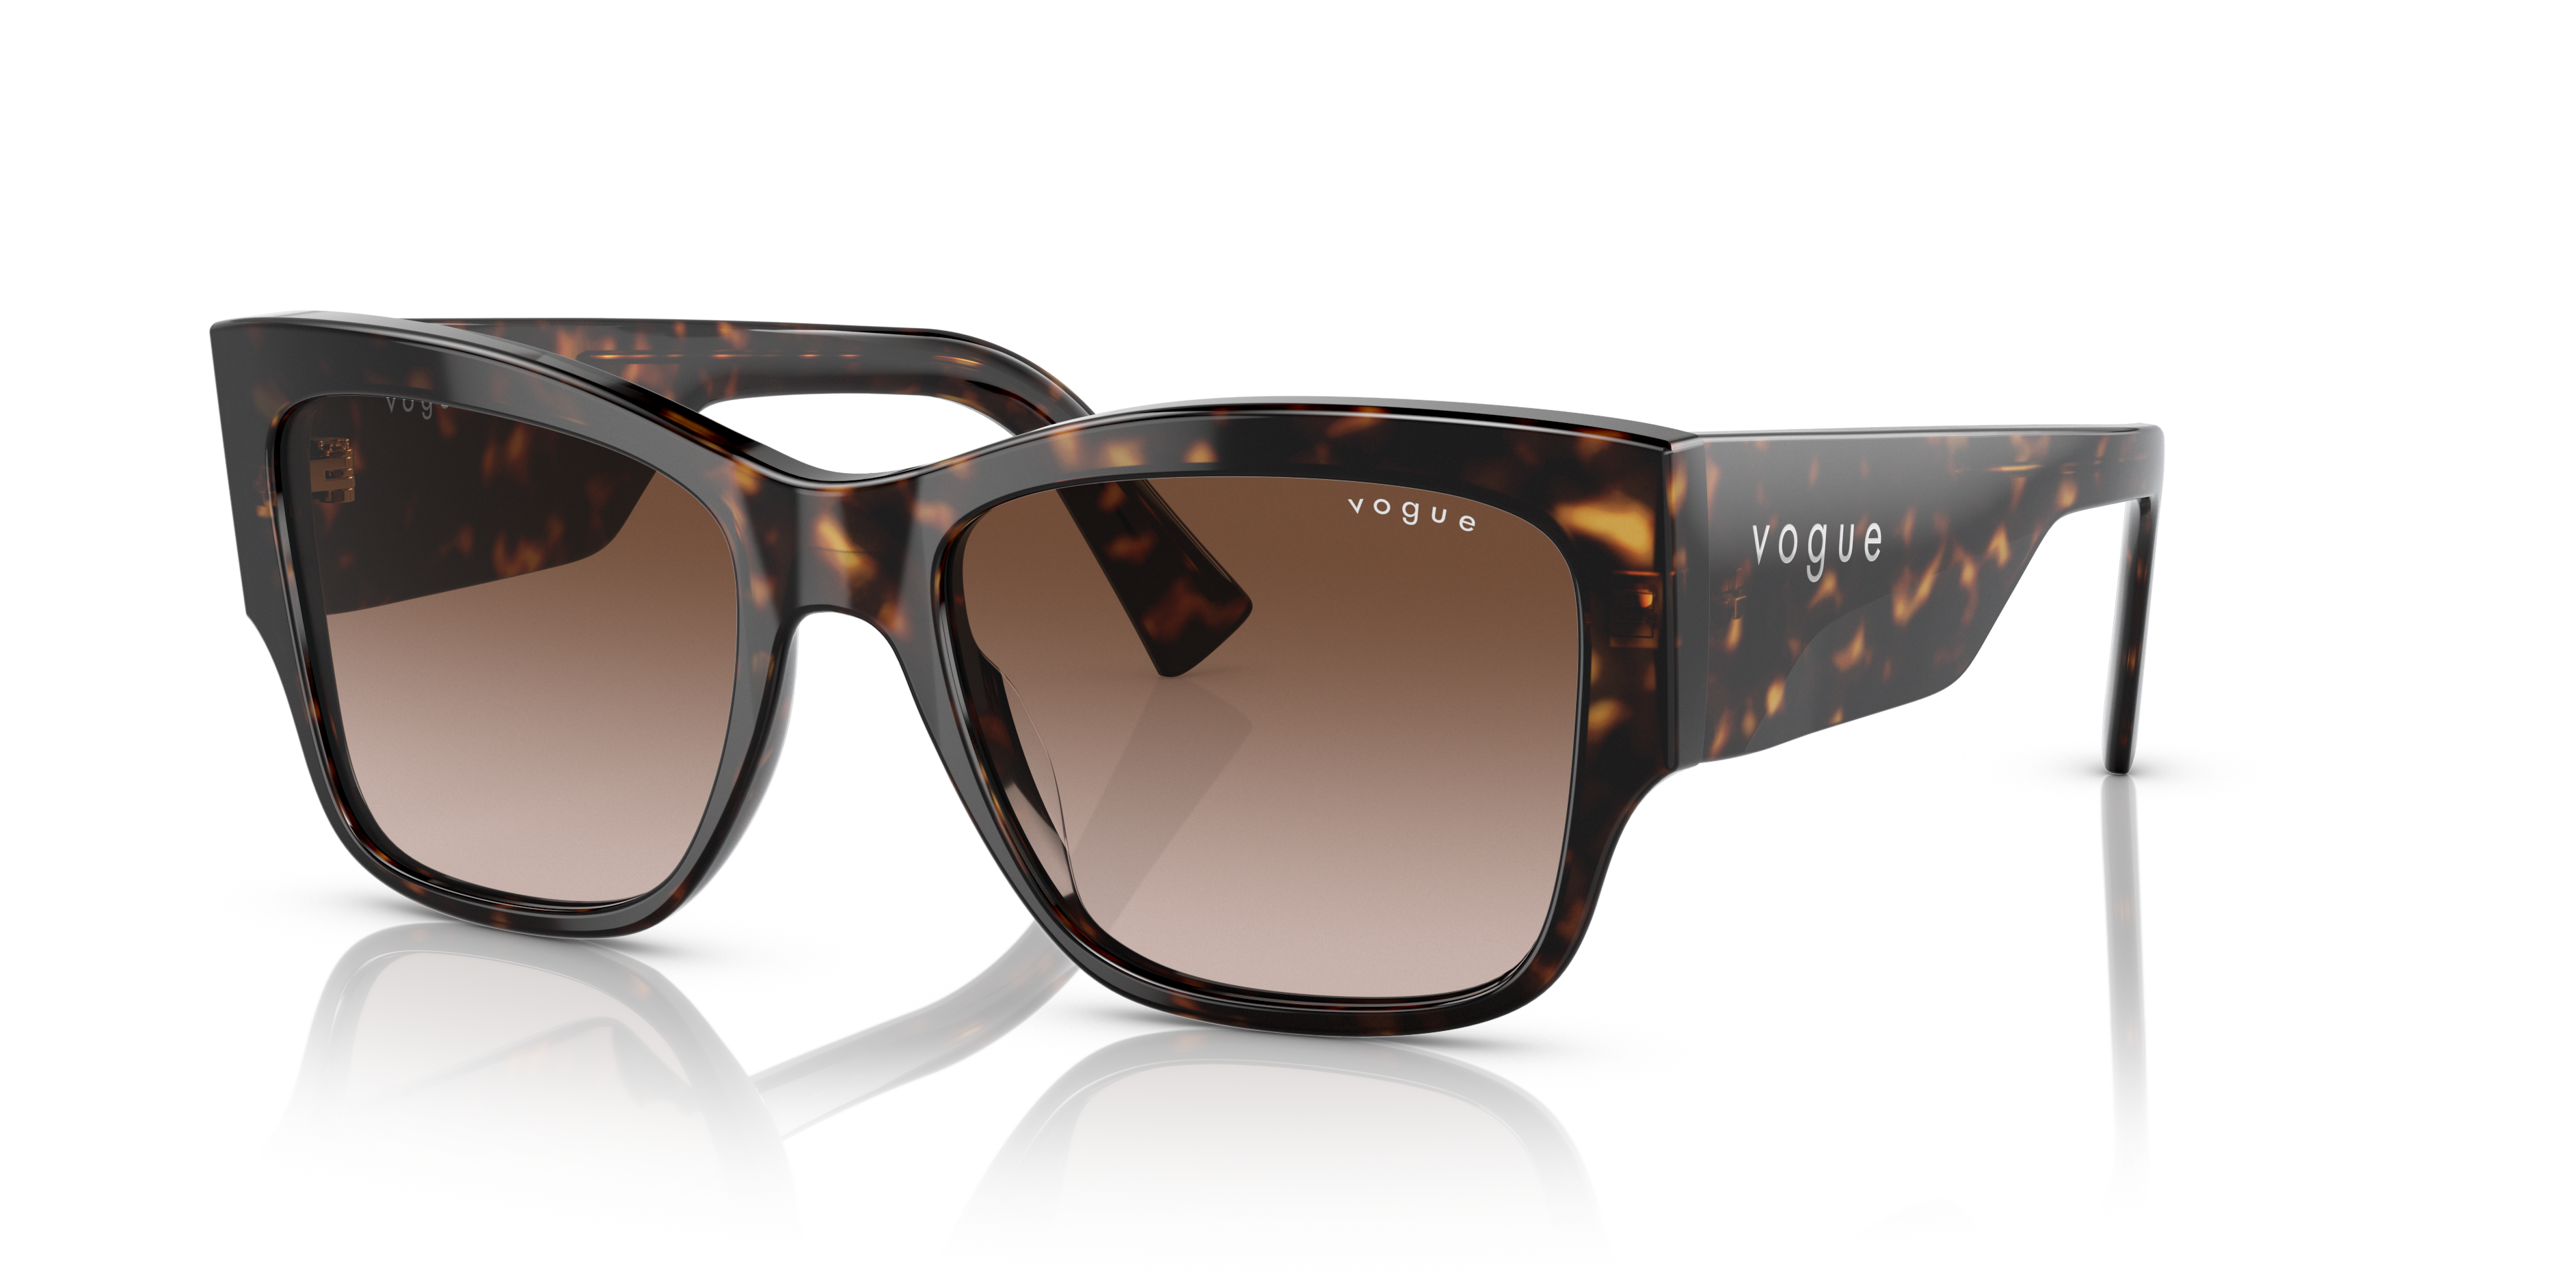 Sunglass Hut - The new Prada Symbole sunglasses explore a new combination  of iconic elements and contemporary design featuring oversized and bold  frame in eye-catching colors. 🔍 PR 23YS: https://bit.ly/SNGH_PR23YS |  Facebook